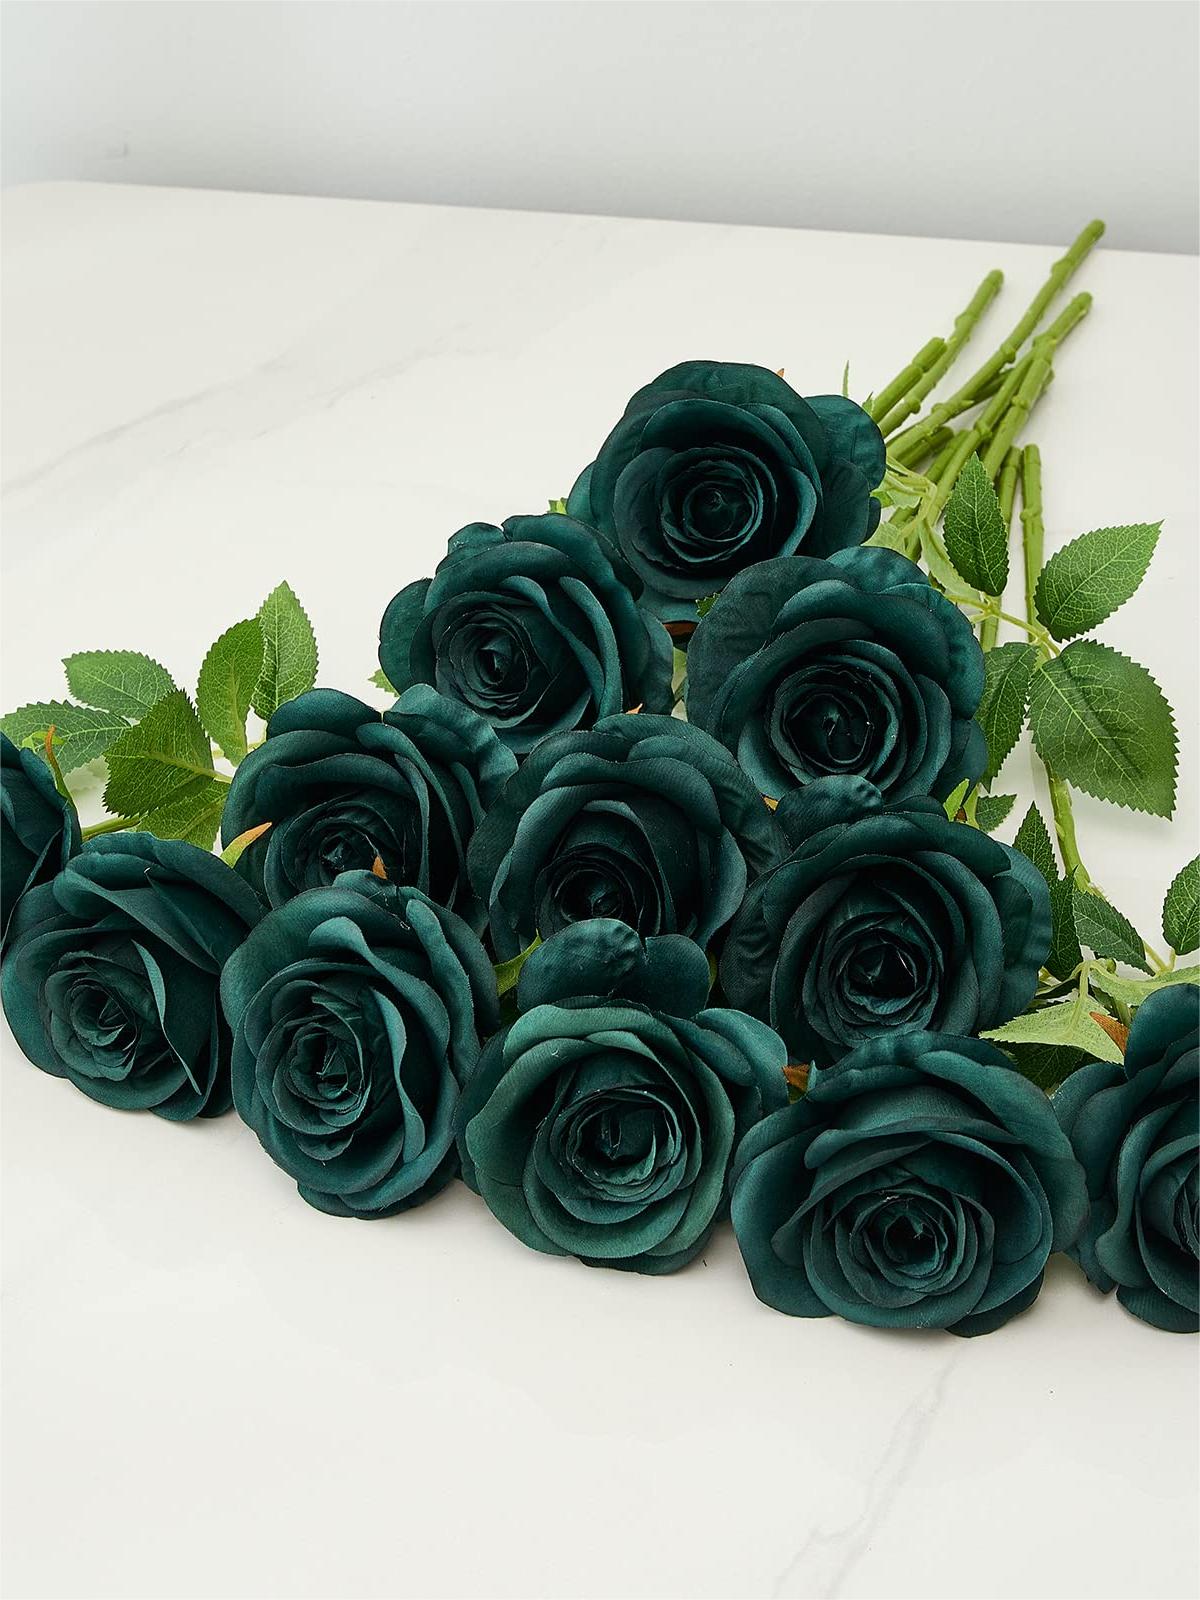 Dark Green Artificial Rose Flowers With Long Stems Wedding Bouquet Centerpieces Decorations HH8044